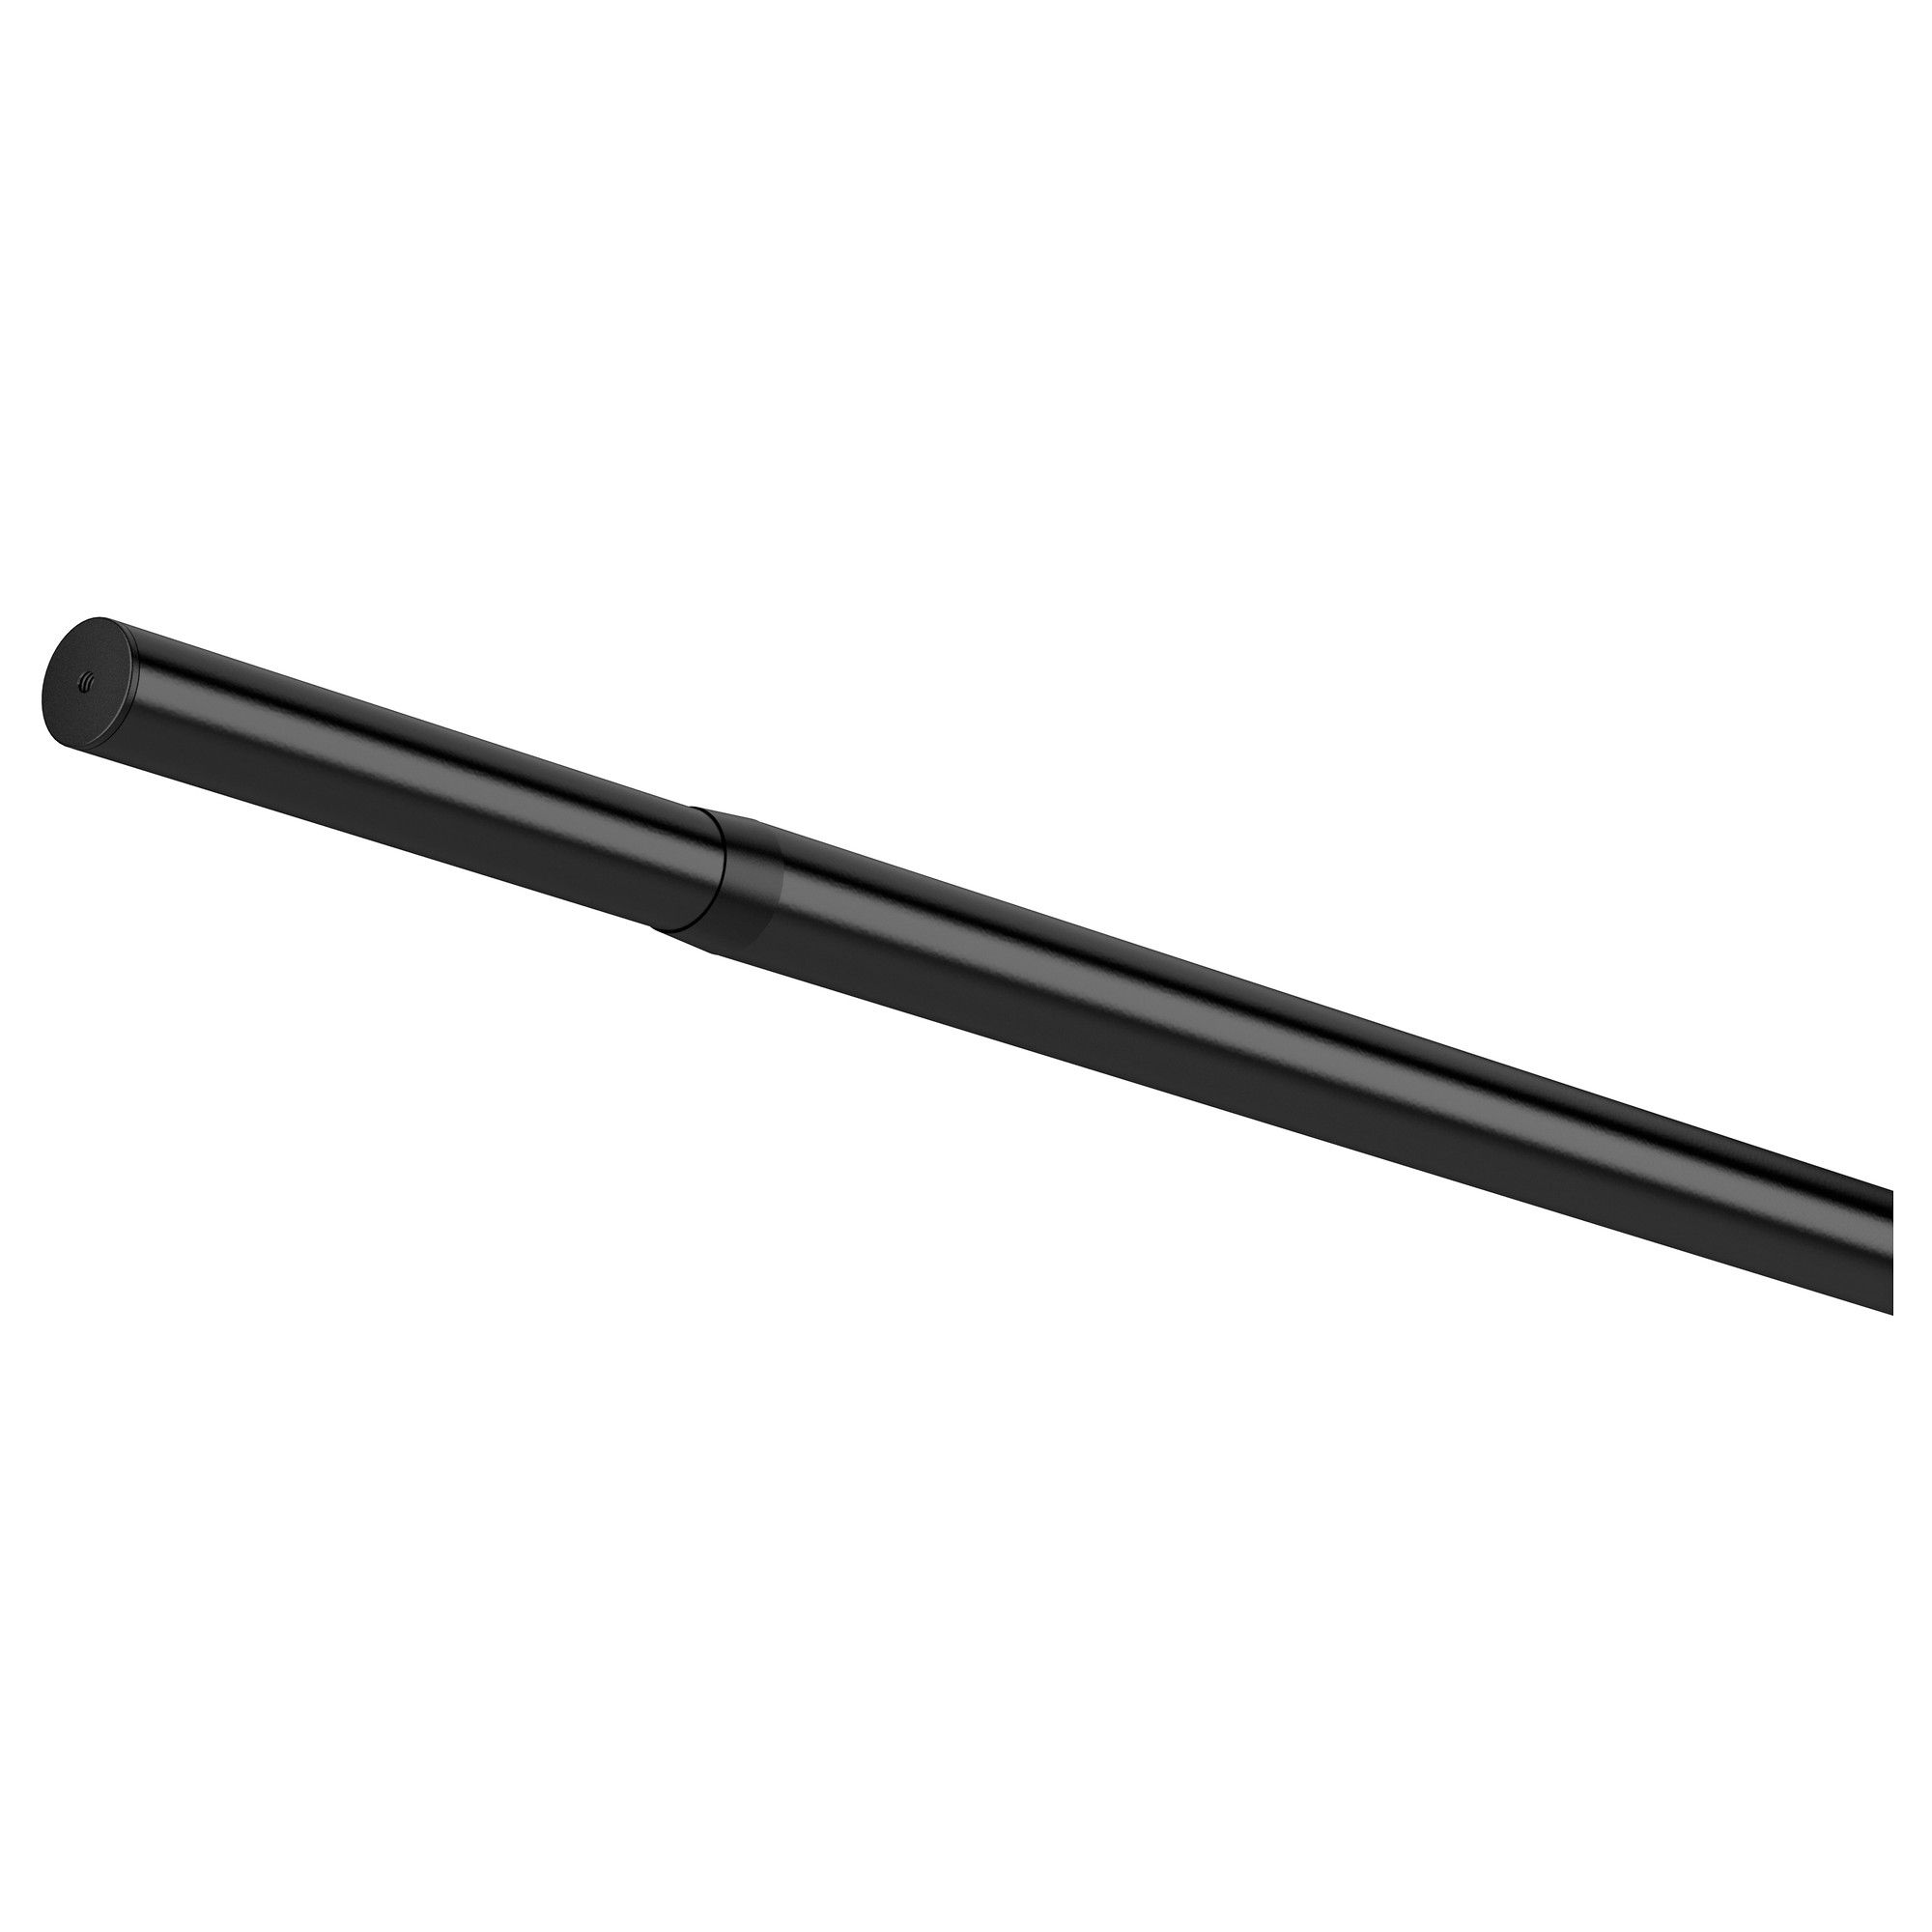 Hugad Curtain Rod Black 47 83 Ikea For Adjustable Rods For Curtains (View 6 of 25)